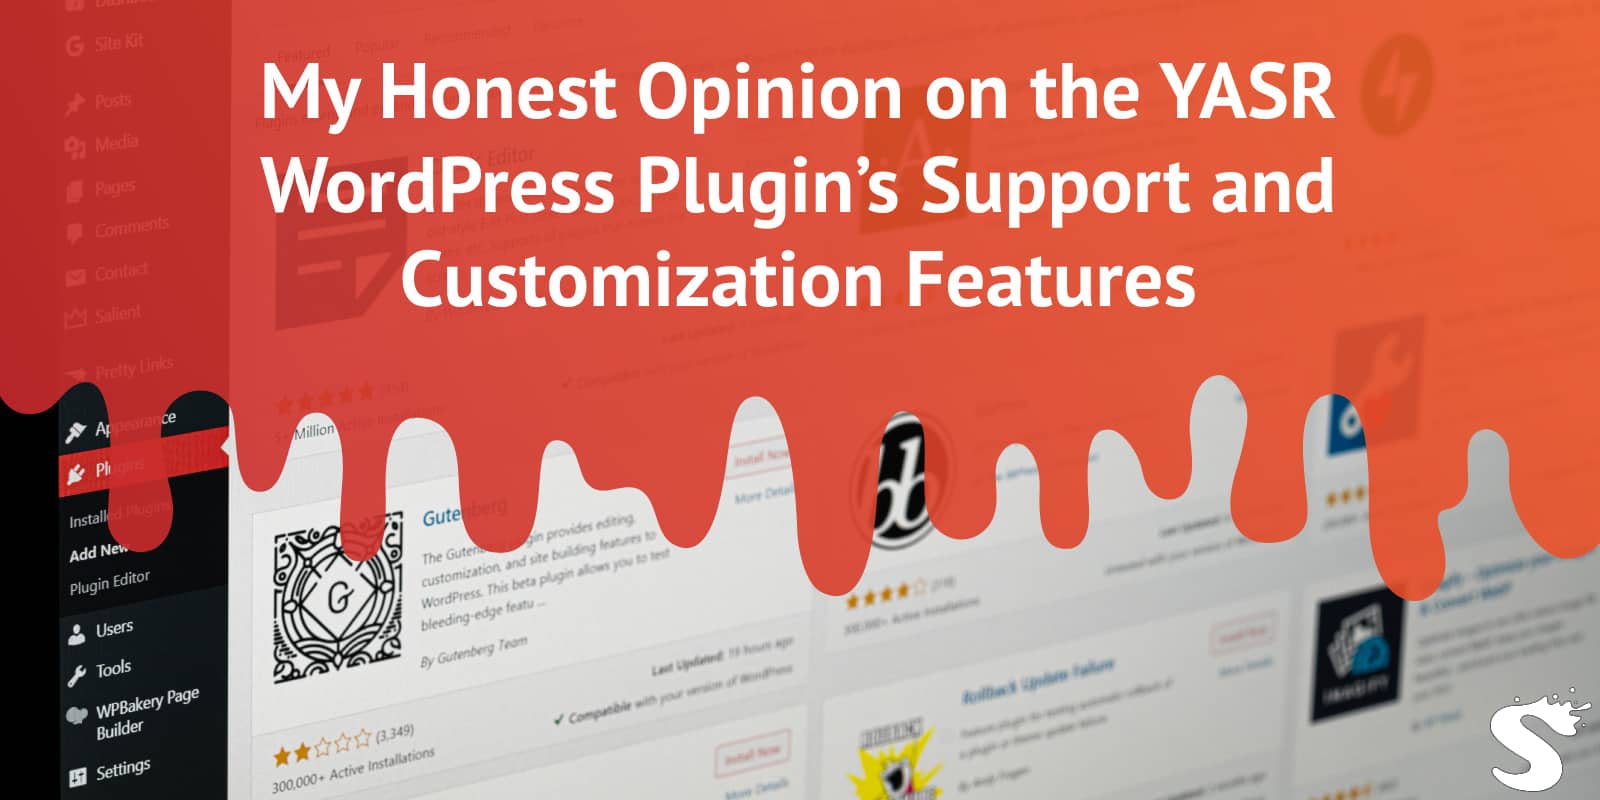 My Honest Opinion on the YASR WordPress Plugin’s Support and Customization Features